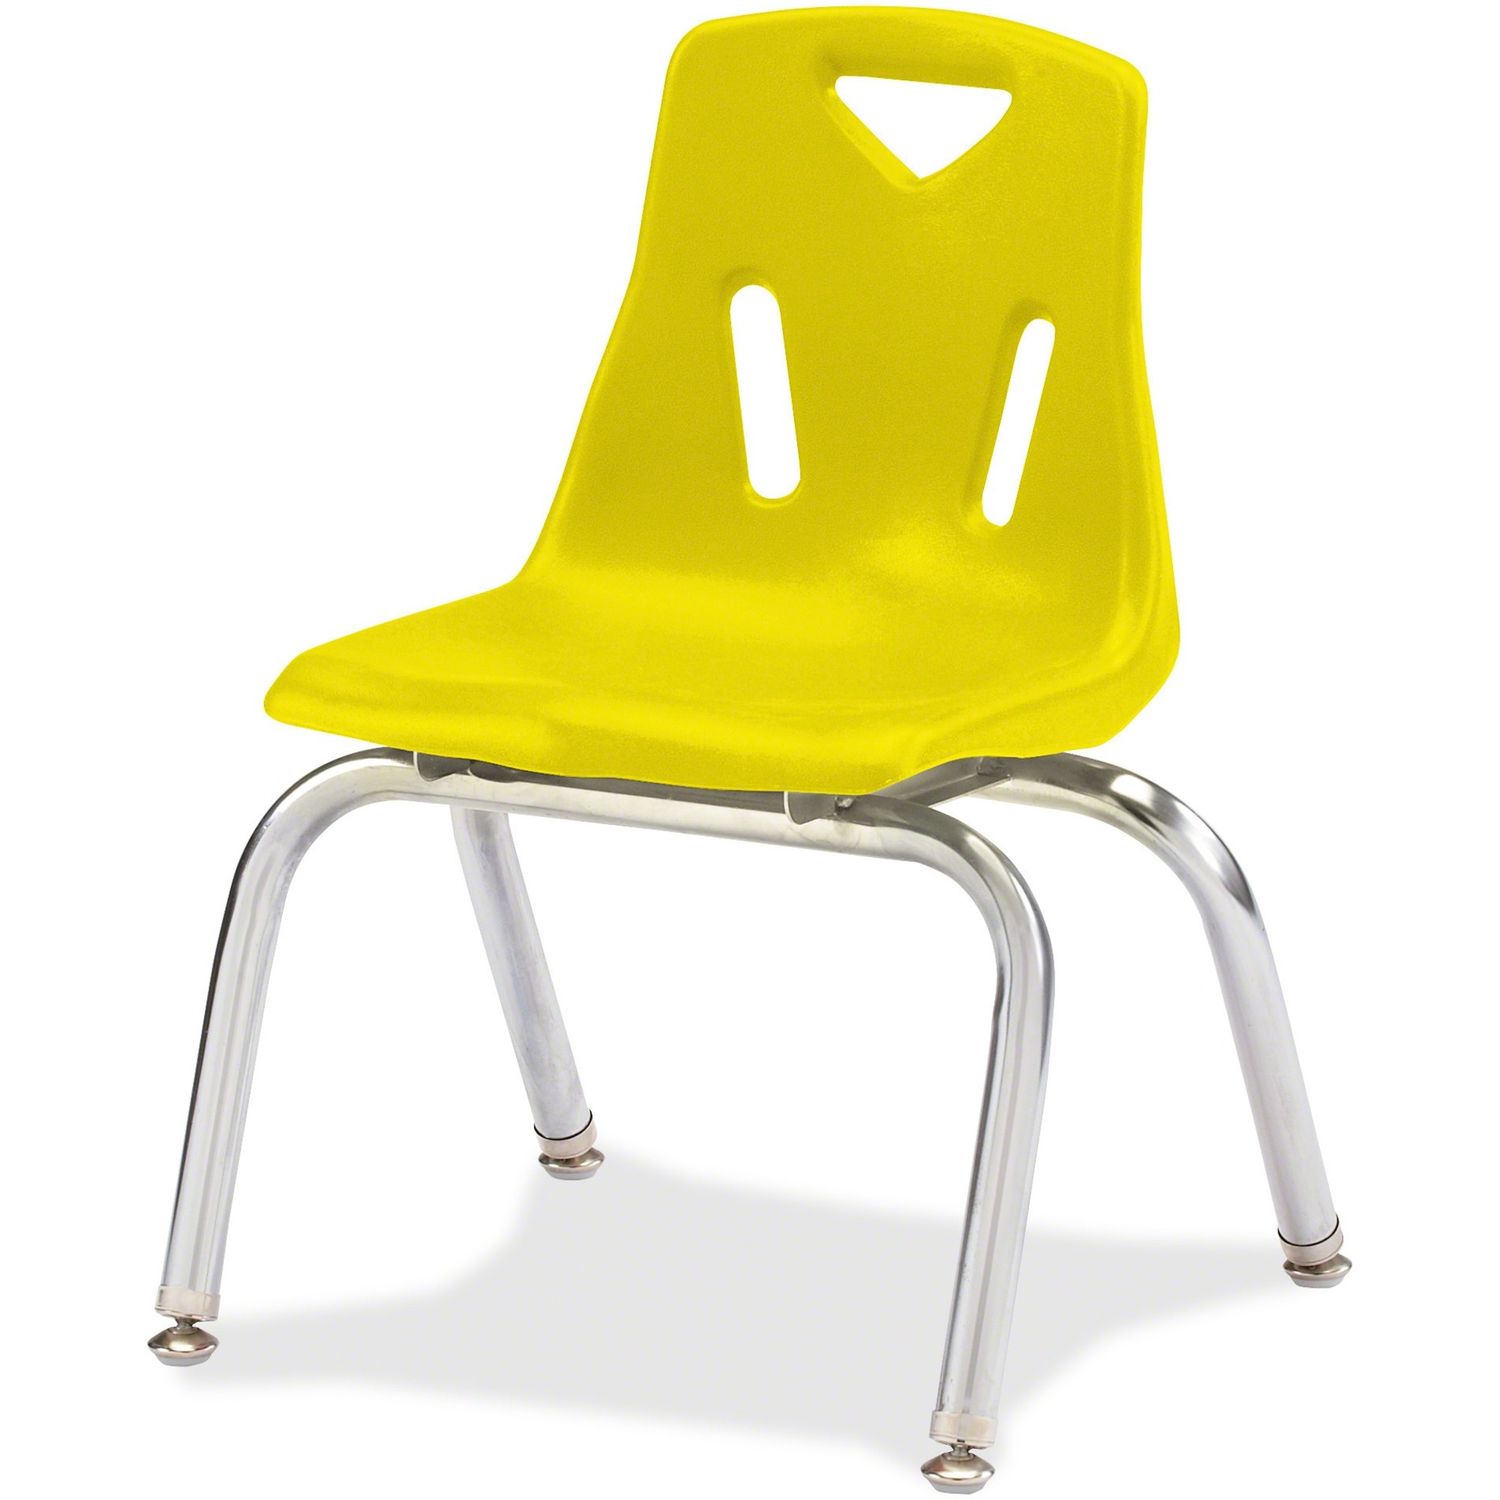 Berries Plastic Chairs with Chrome-Plated Legs Yellow Polypropylene Seat, Steel Frame, Four-legged Base, Yellow, 1 Each